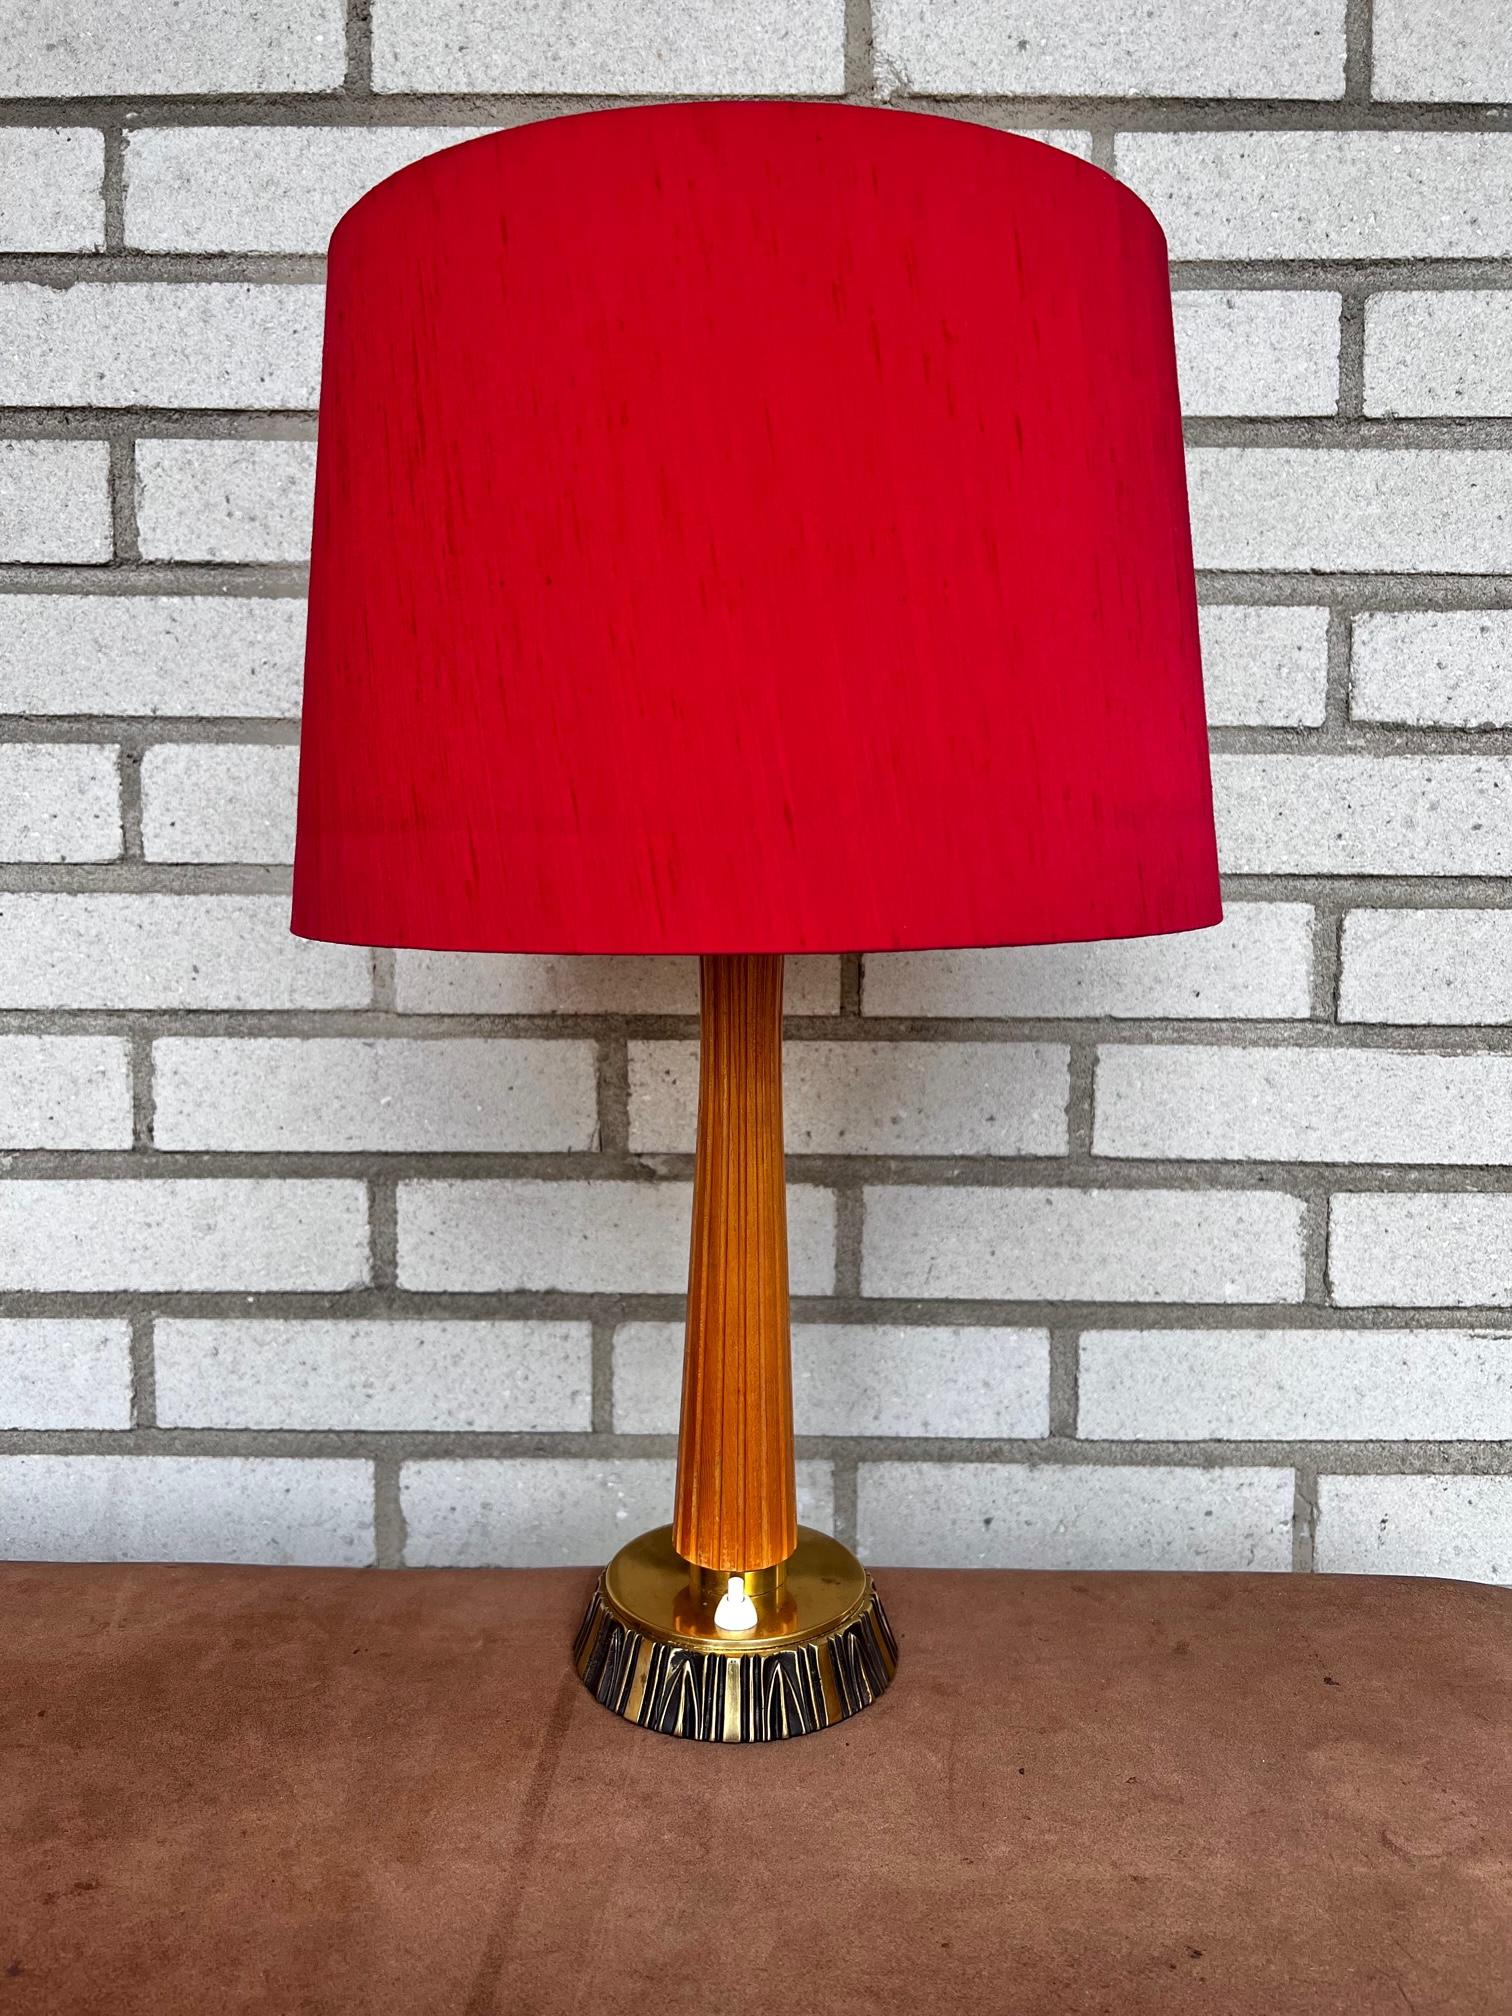 Table lamp designed by the Swedish sculptor Sonja Katzin, (1919-2014). Produced by ASEA in Sweden during the 1950s. The lamp has been given the number E1141 and a ASEA stamp underneath the base. 

The lamp height is to the socket is 38cm and with